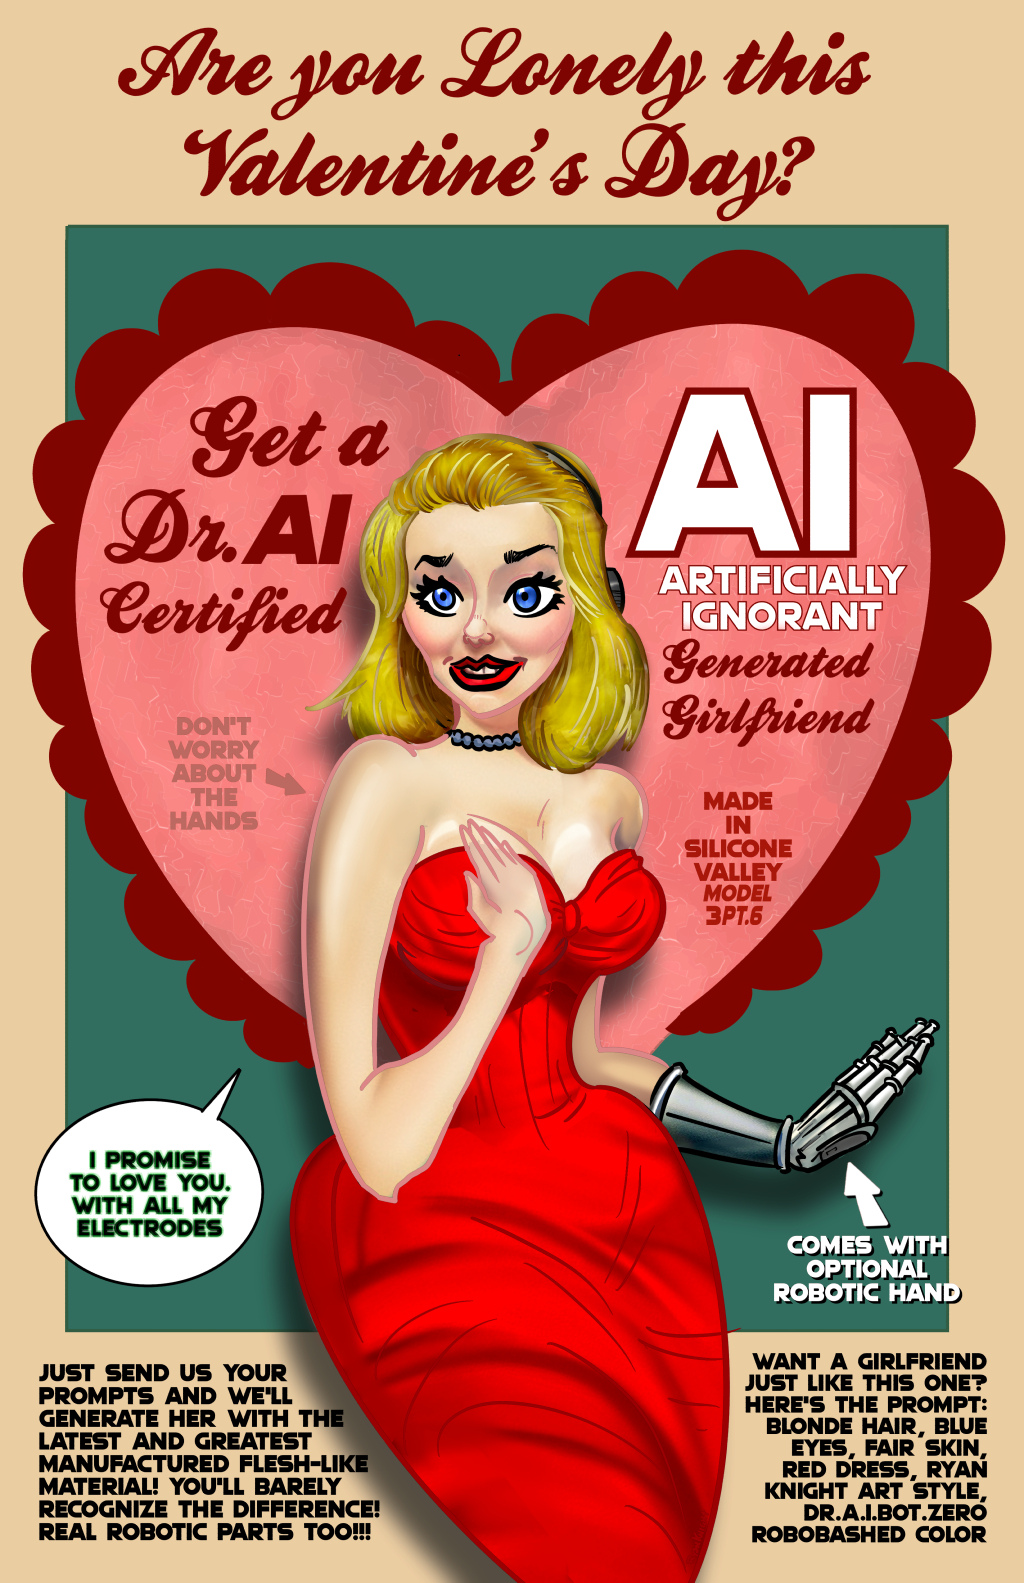 Get a Dr.A.I. Certified Artificially Ignorant Generated Girlfriend Today!